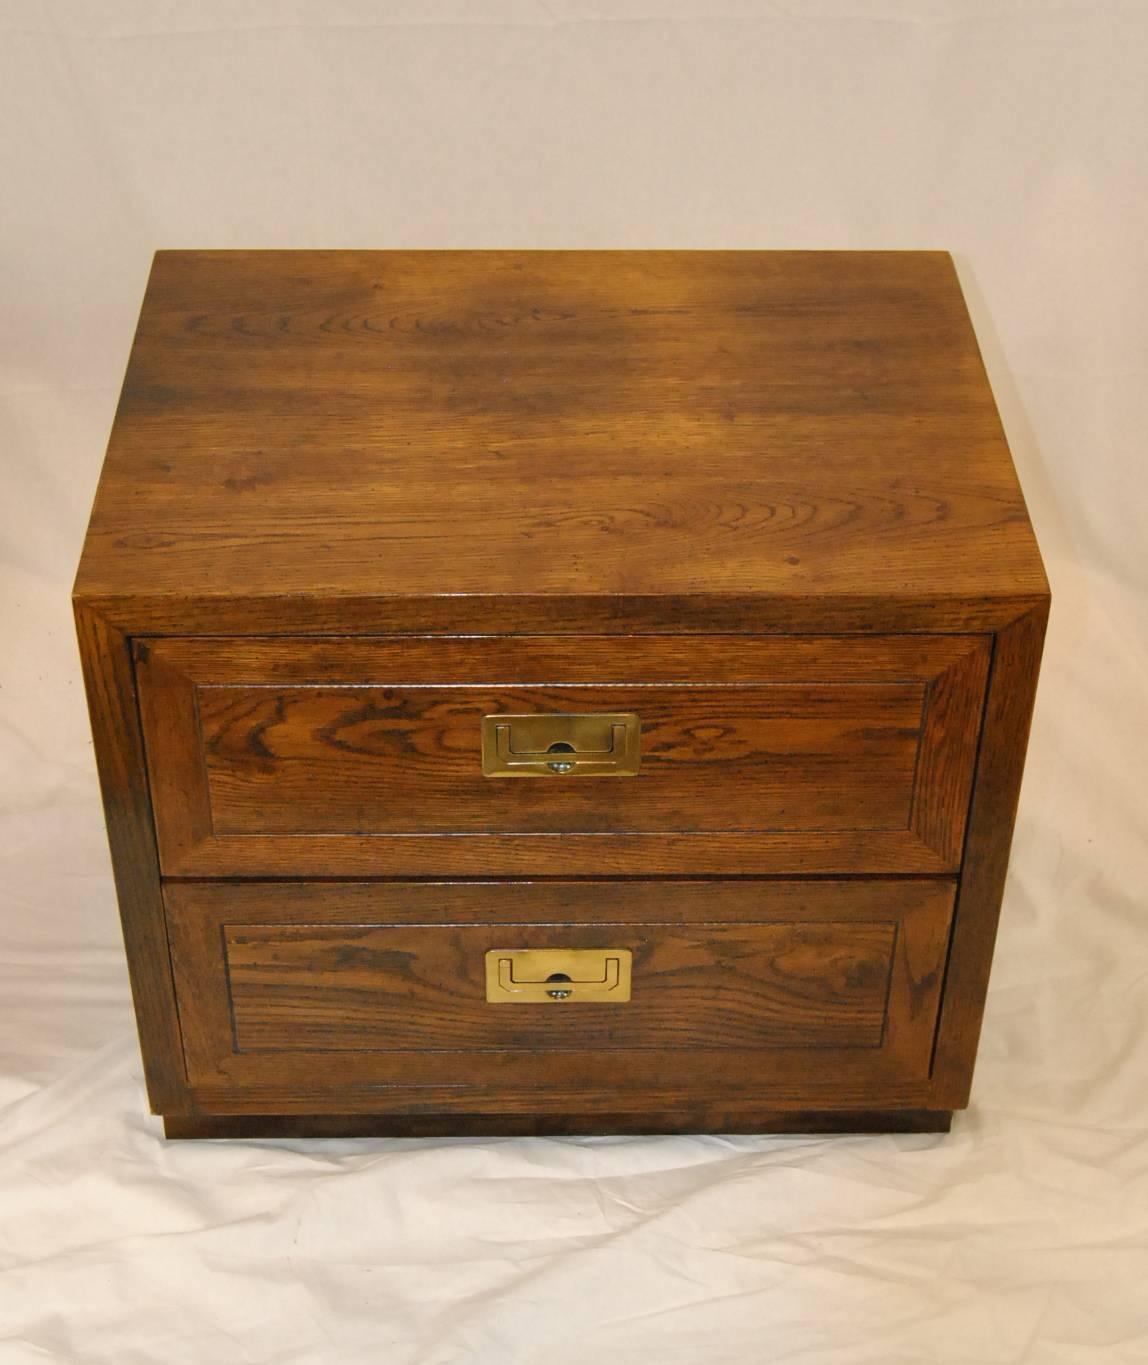 A fantastic pair of Henredon campaign style nightstands. They feature a beautifully grained walnut finish, brass Campaign style hardware and dovetailed drawers. Marked on the inside drawer with the Henredon name. Excellent quality and craftsmanship.